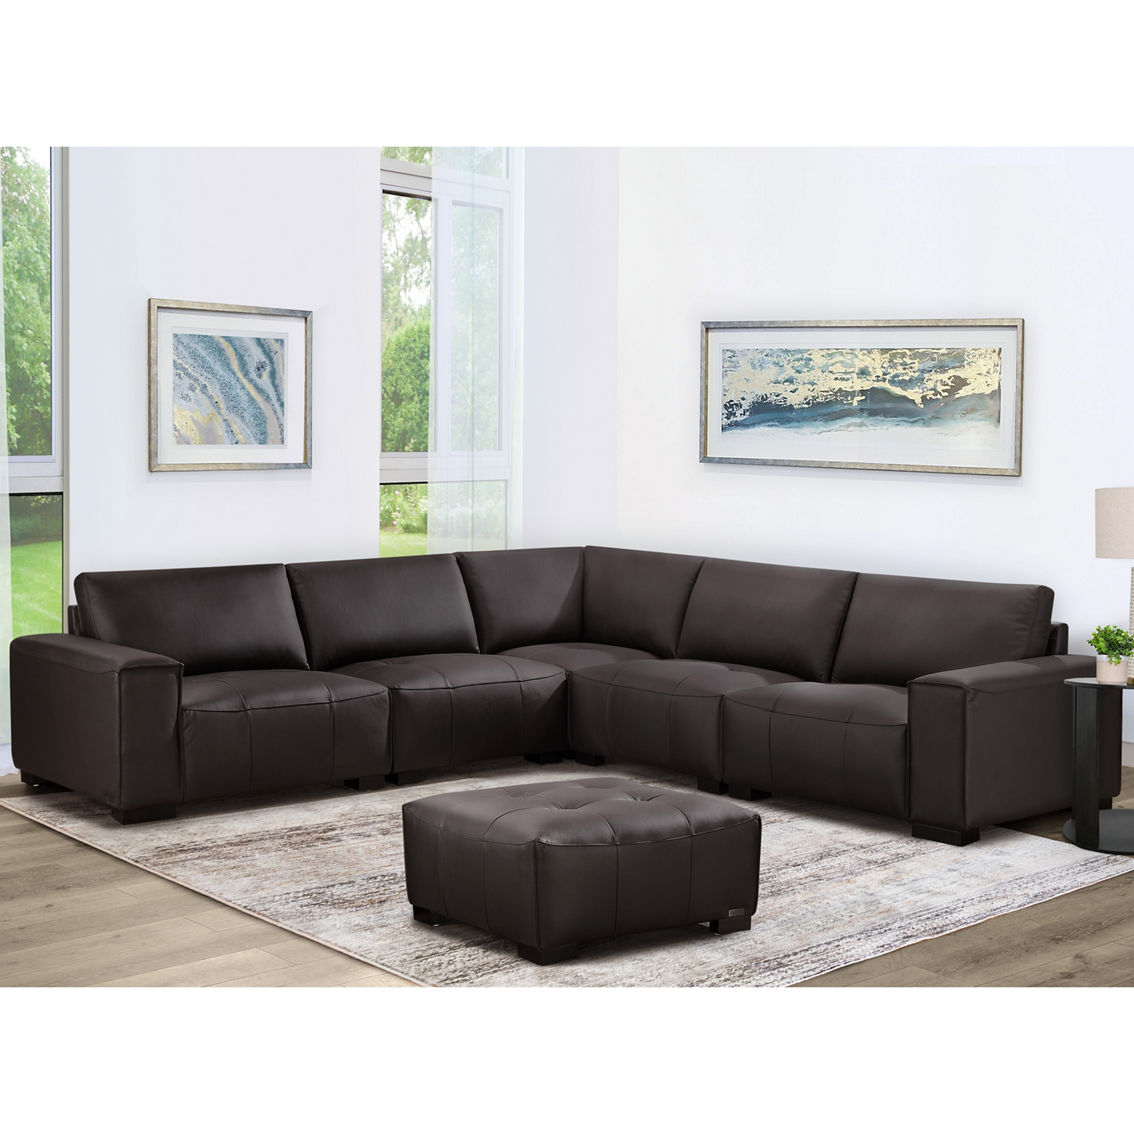 Abbyson Teagan Leather Modular Sectional 6 pc. - Image 5 of 9